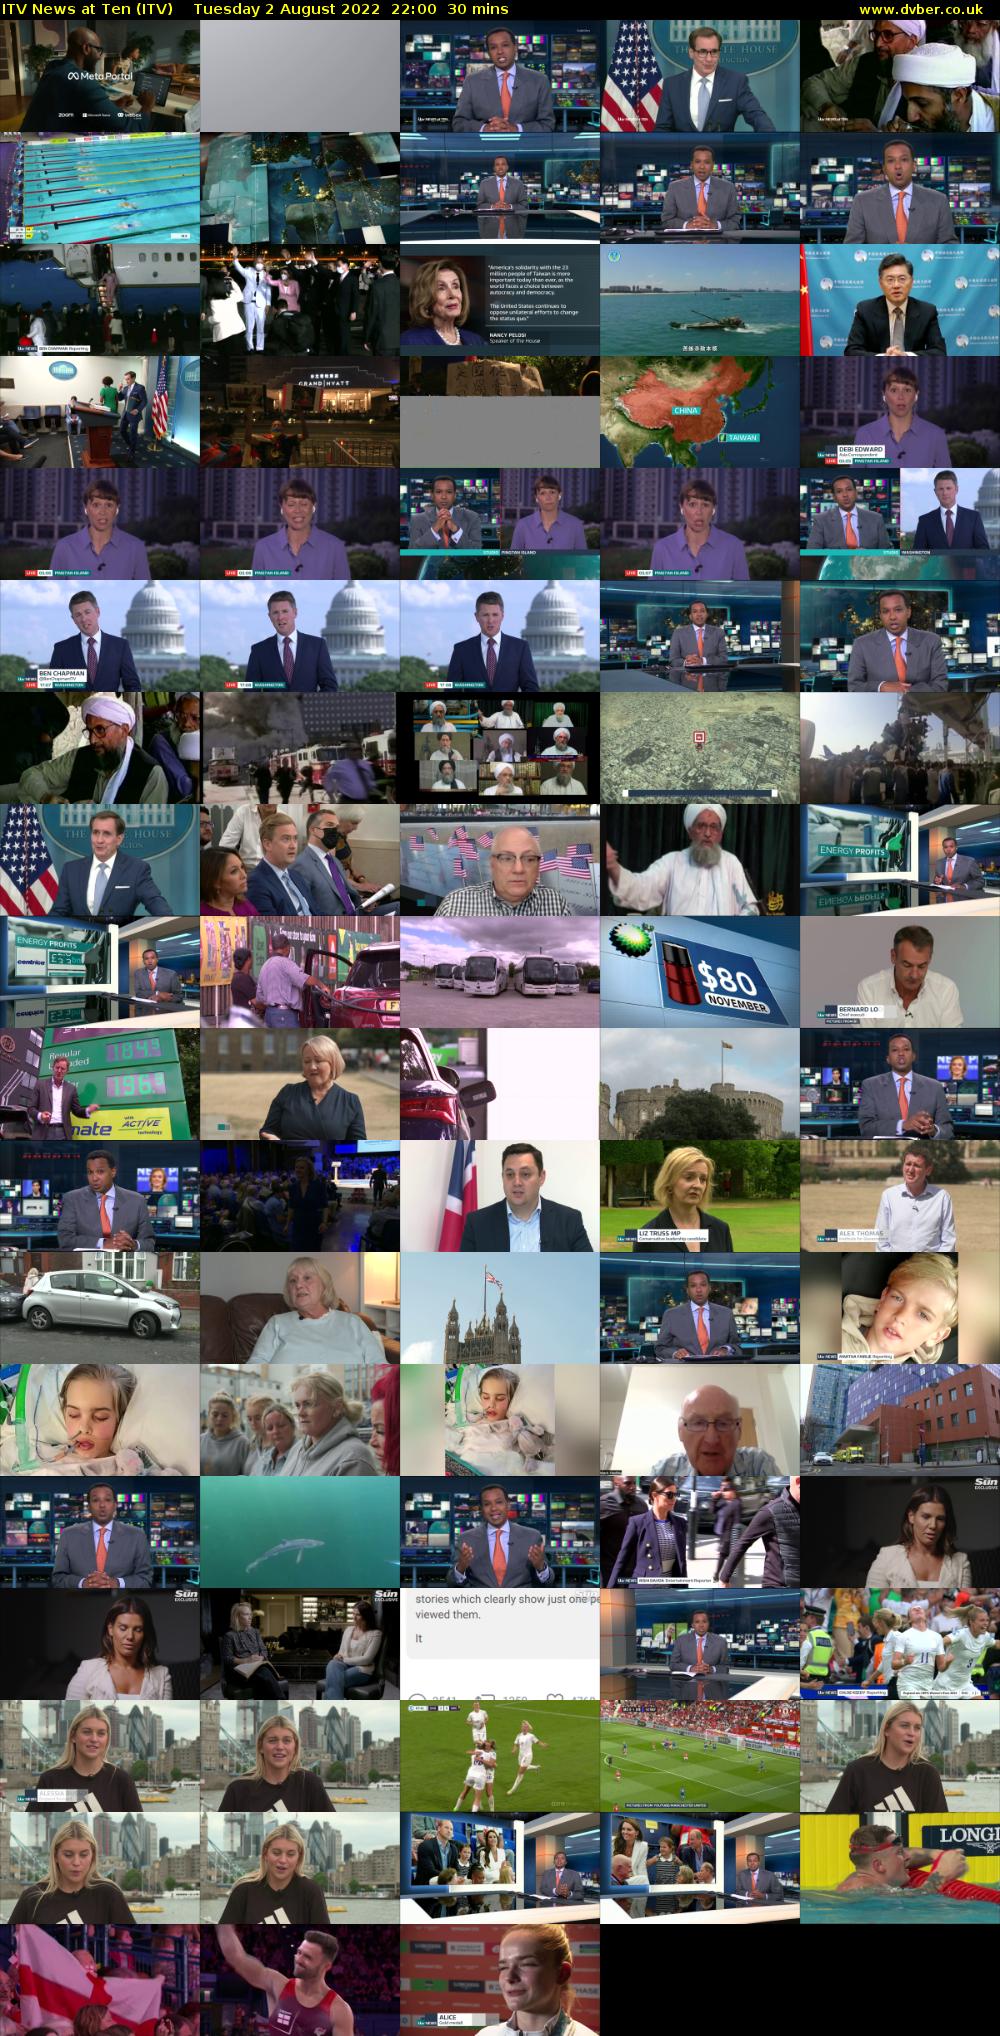 ITV News at Ten (ITV) Tuesday 2 August 2022 22:00 - 22:30